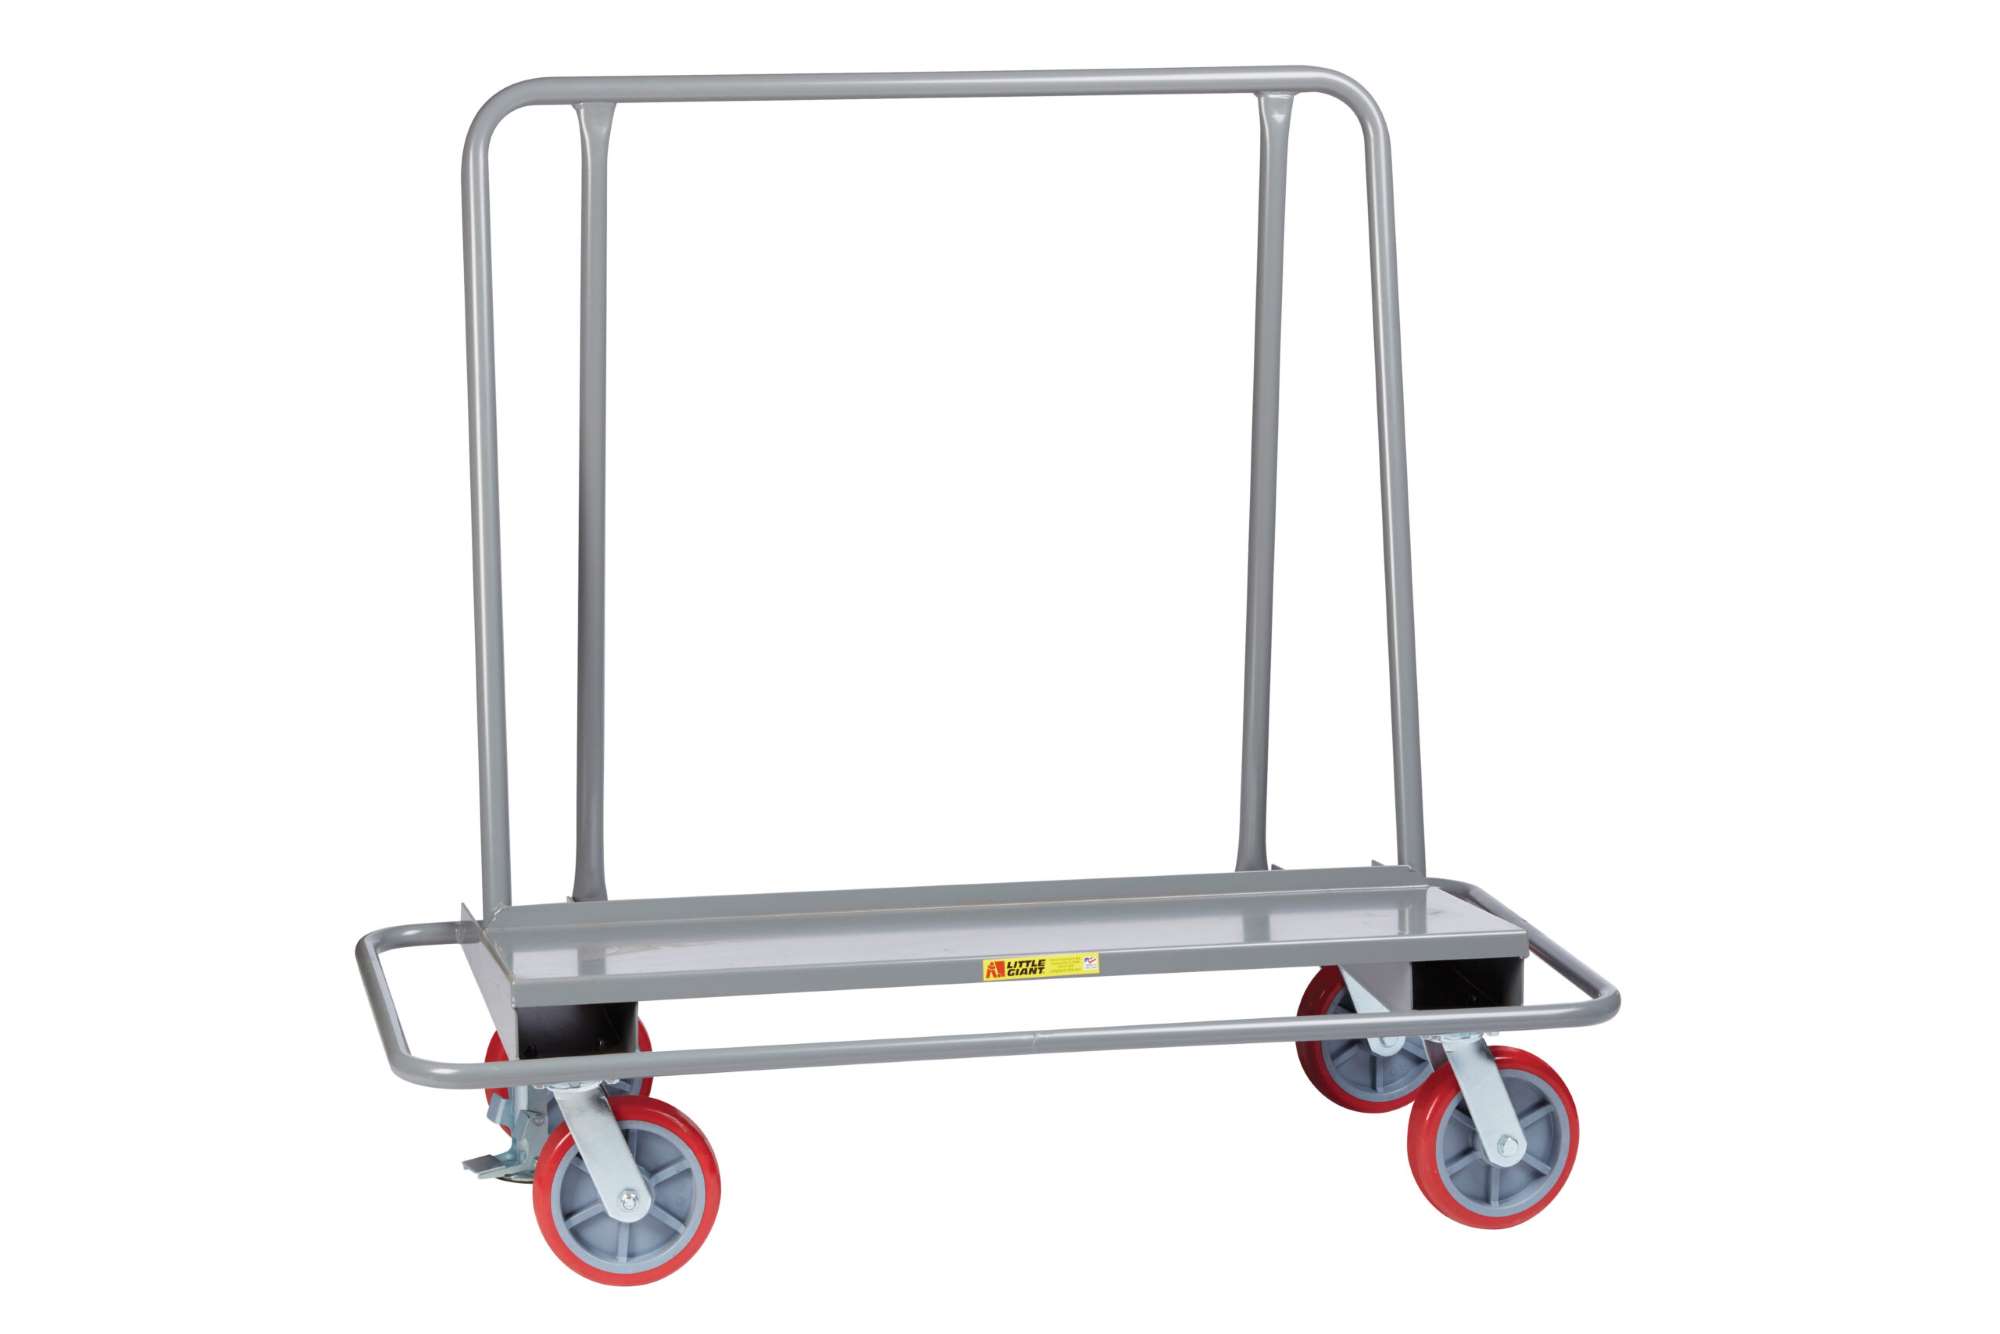 Little Giant, Drywall cart with steel bumper frame, 2000 lbs capacity, Tube steel bumper, 12ga deck, 14"x44" deck, Avialable with 4 swivel casters or 2 rigid / 2 swivel casters with floor lock, 8"wheels, Overall 26"W x 54"L x 51"H